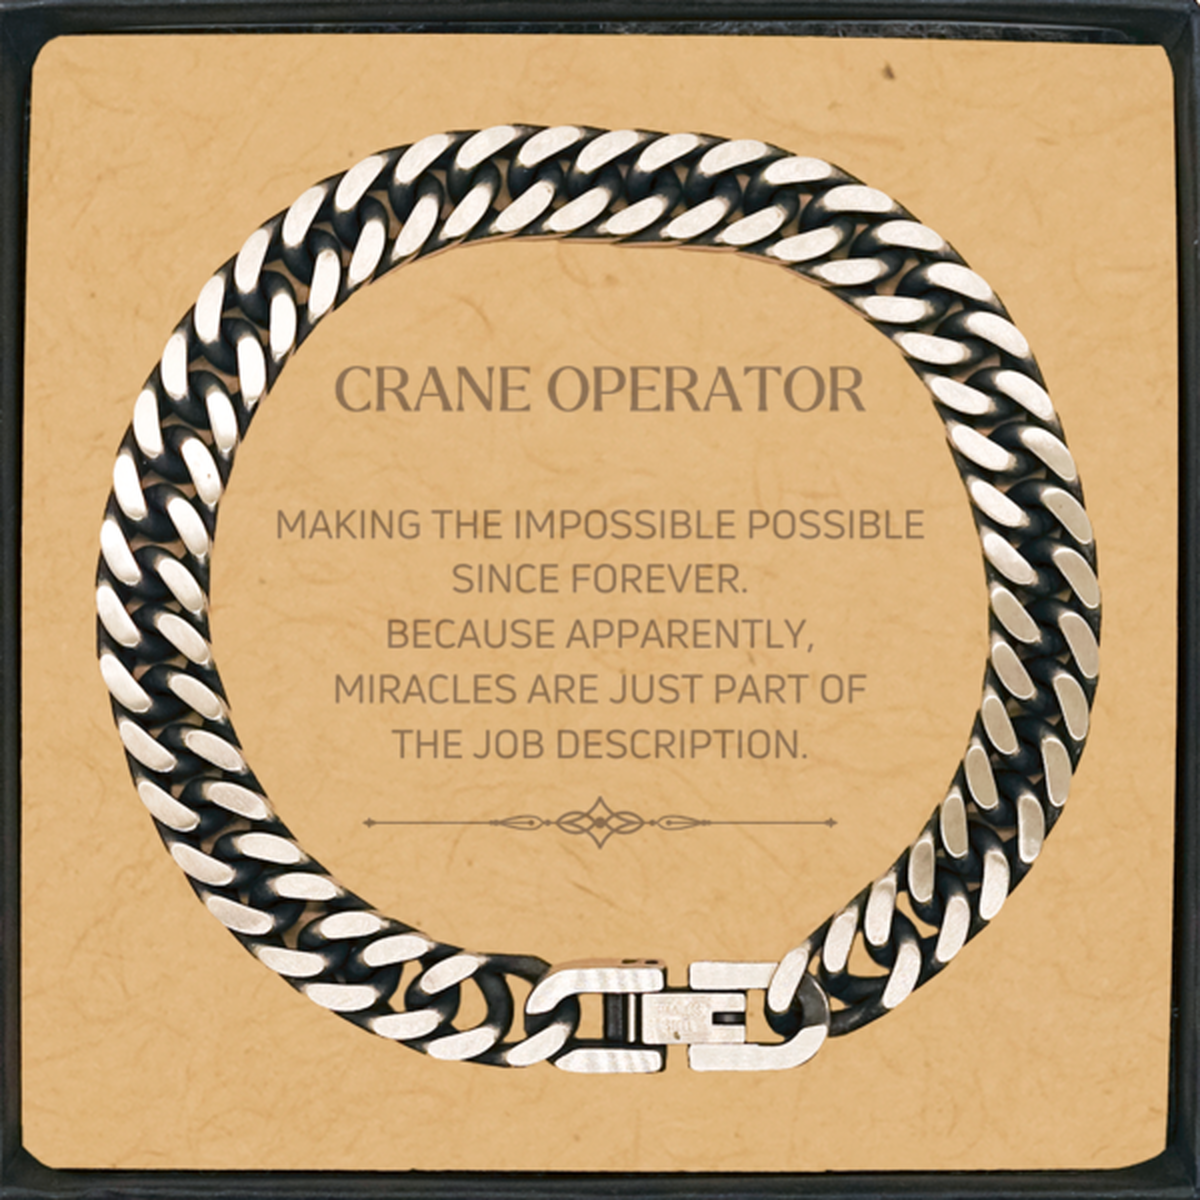 Funny Crane Operator Gifts, Miracles are just part of the job description, Inspirational Birthday Cuban Link Chain Bracelet For Crane Operator, Men, Women, Coworkers, Friends, Boss